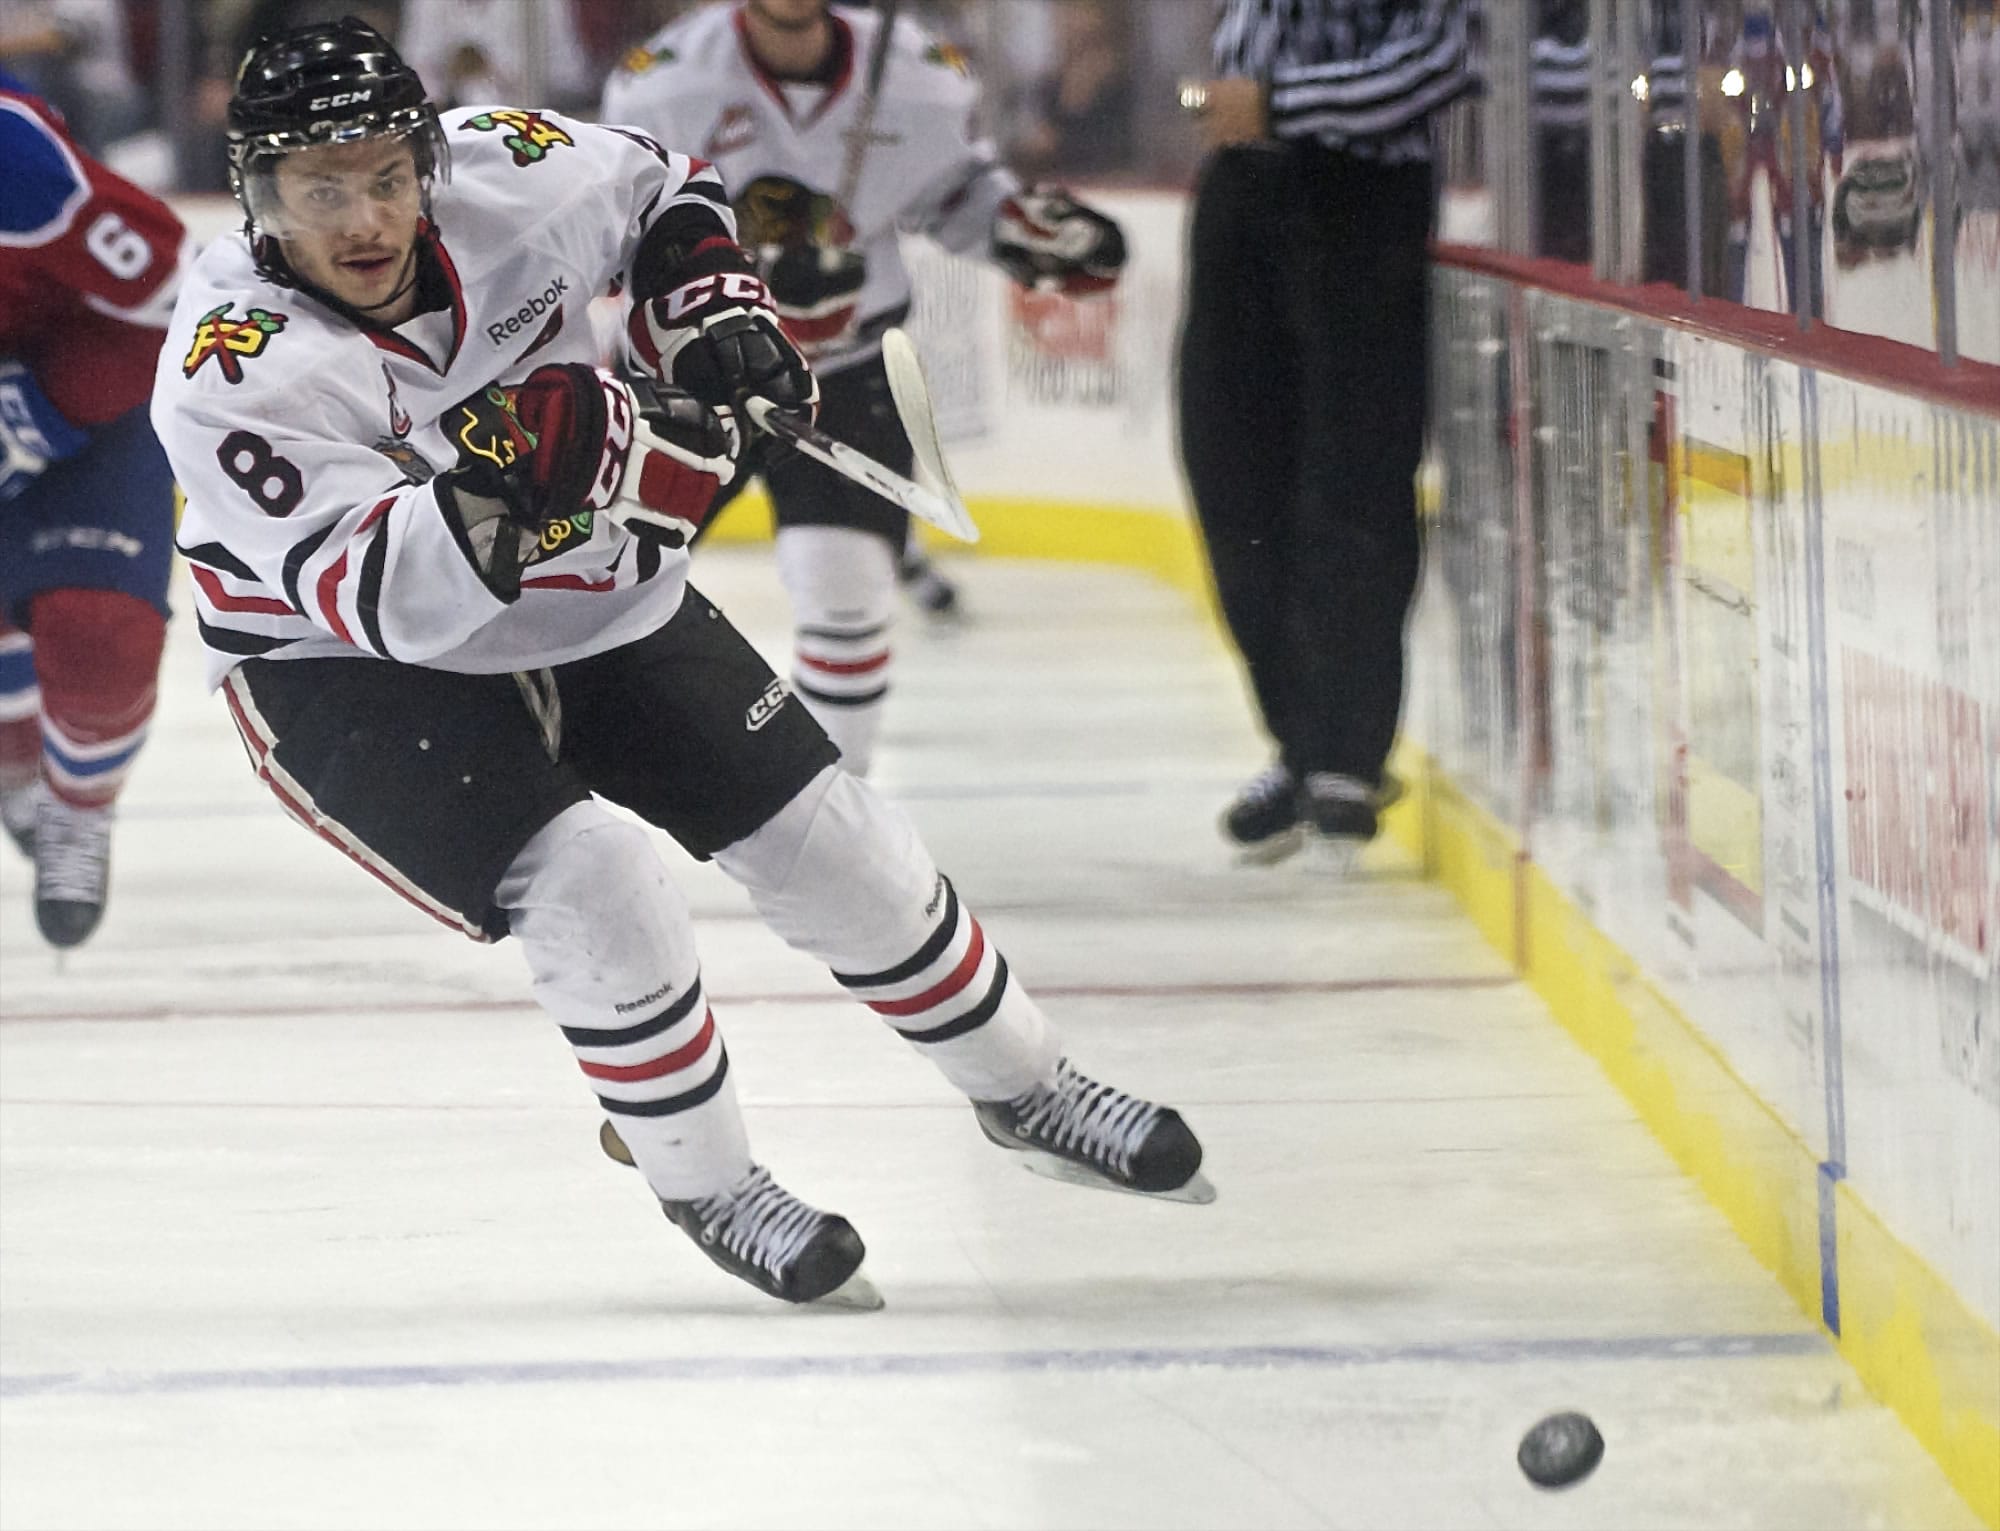 The Winterhawks' Ty Rattie carries the puck in to the offensive zone in the second period against the Oil Kings in Game 5 of the WHL championship series.